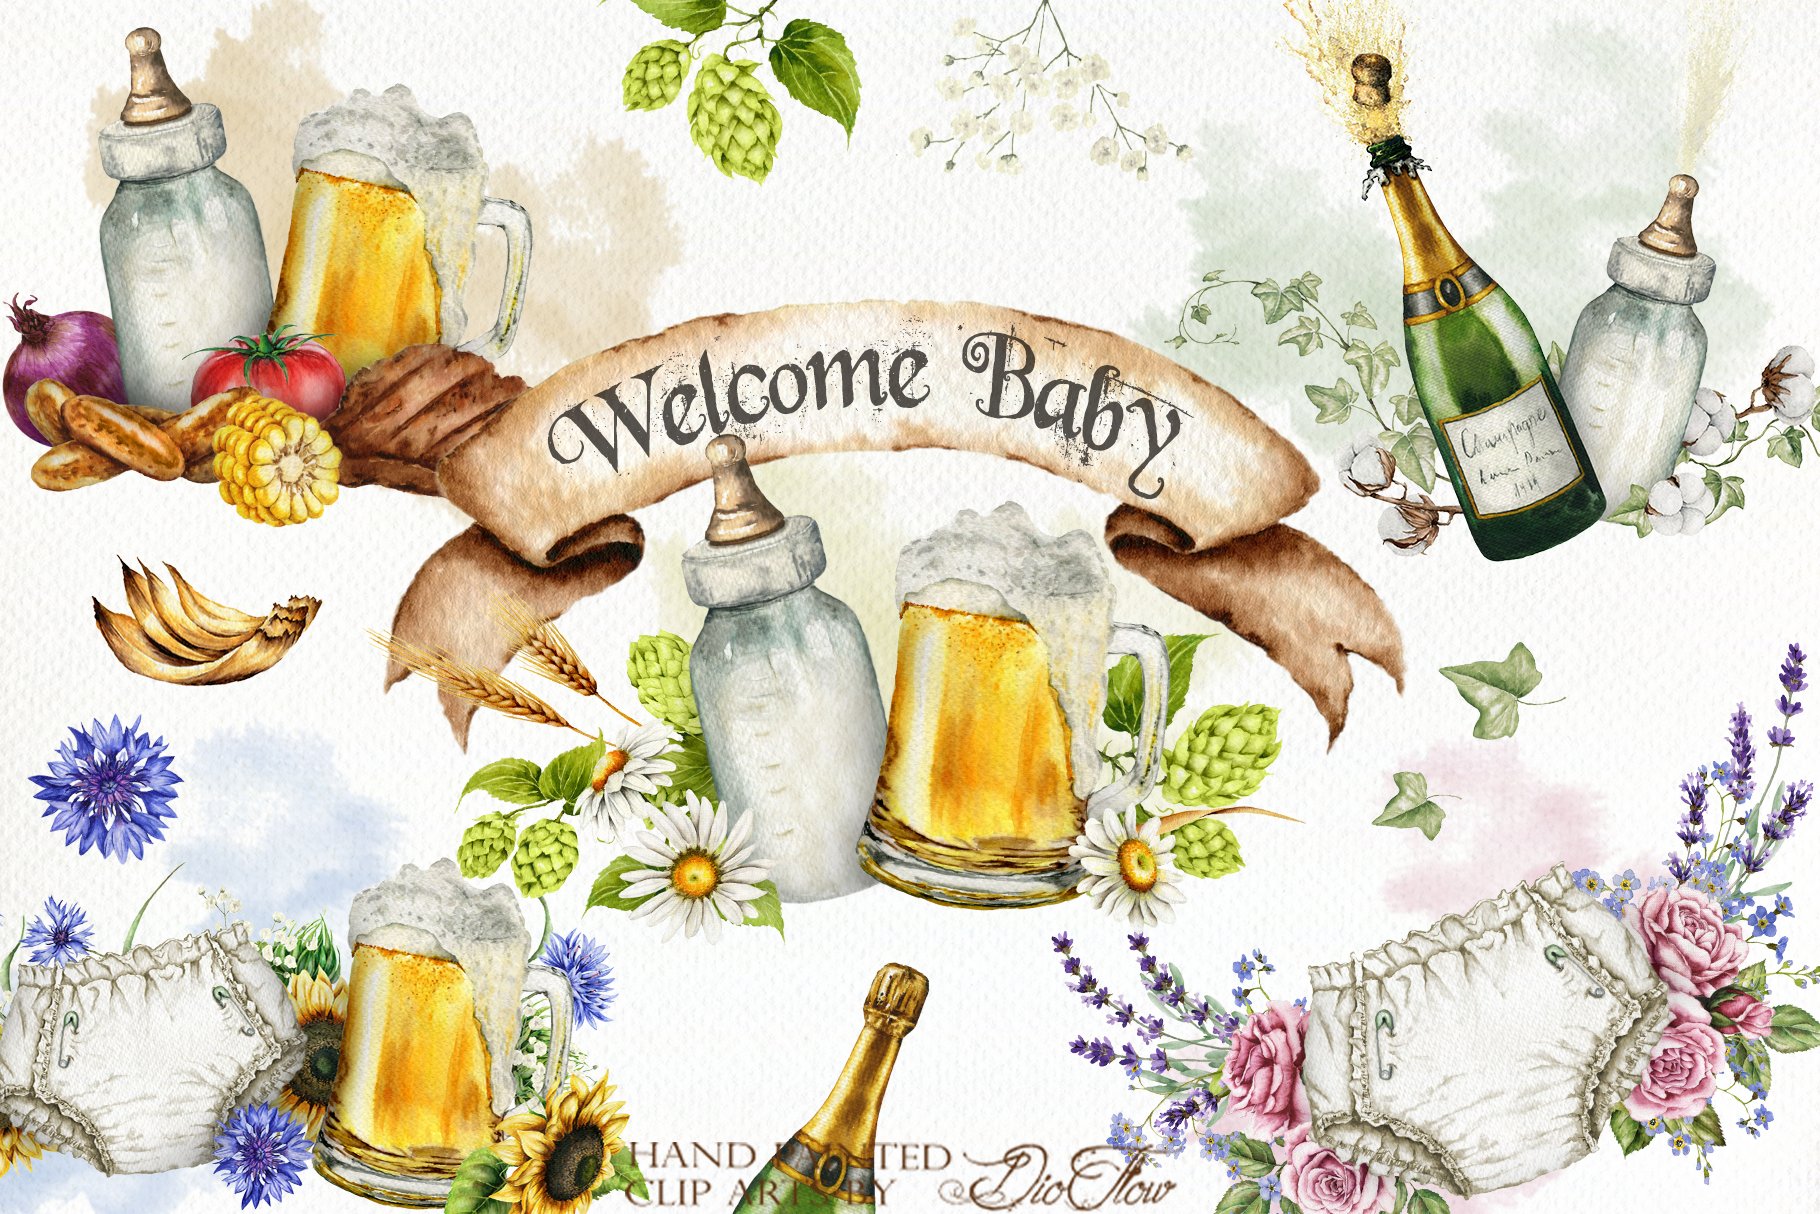 Welcome Baby Illustration cover image.